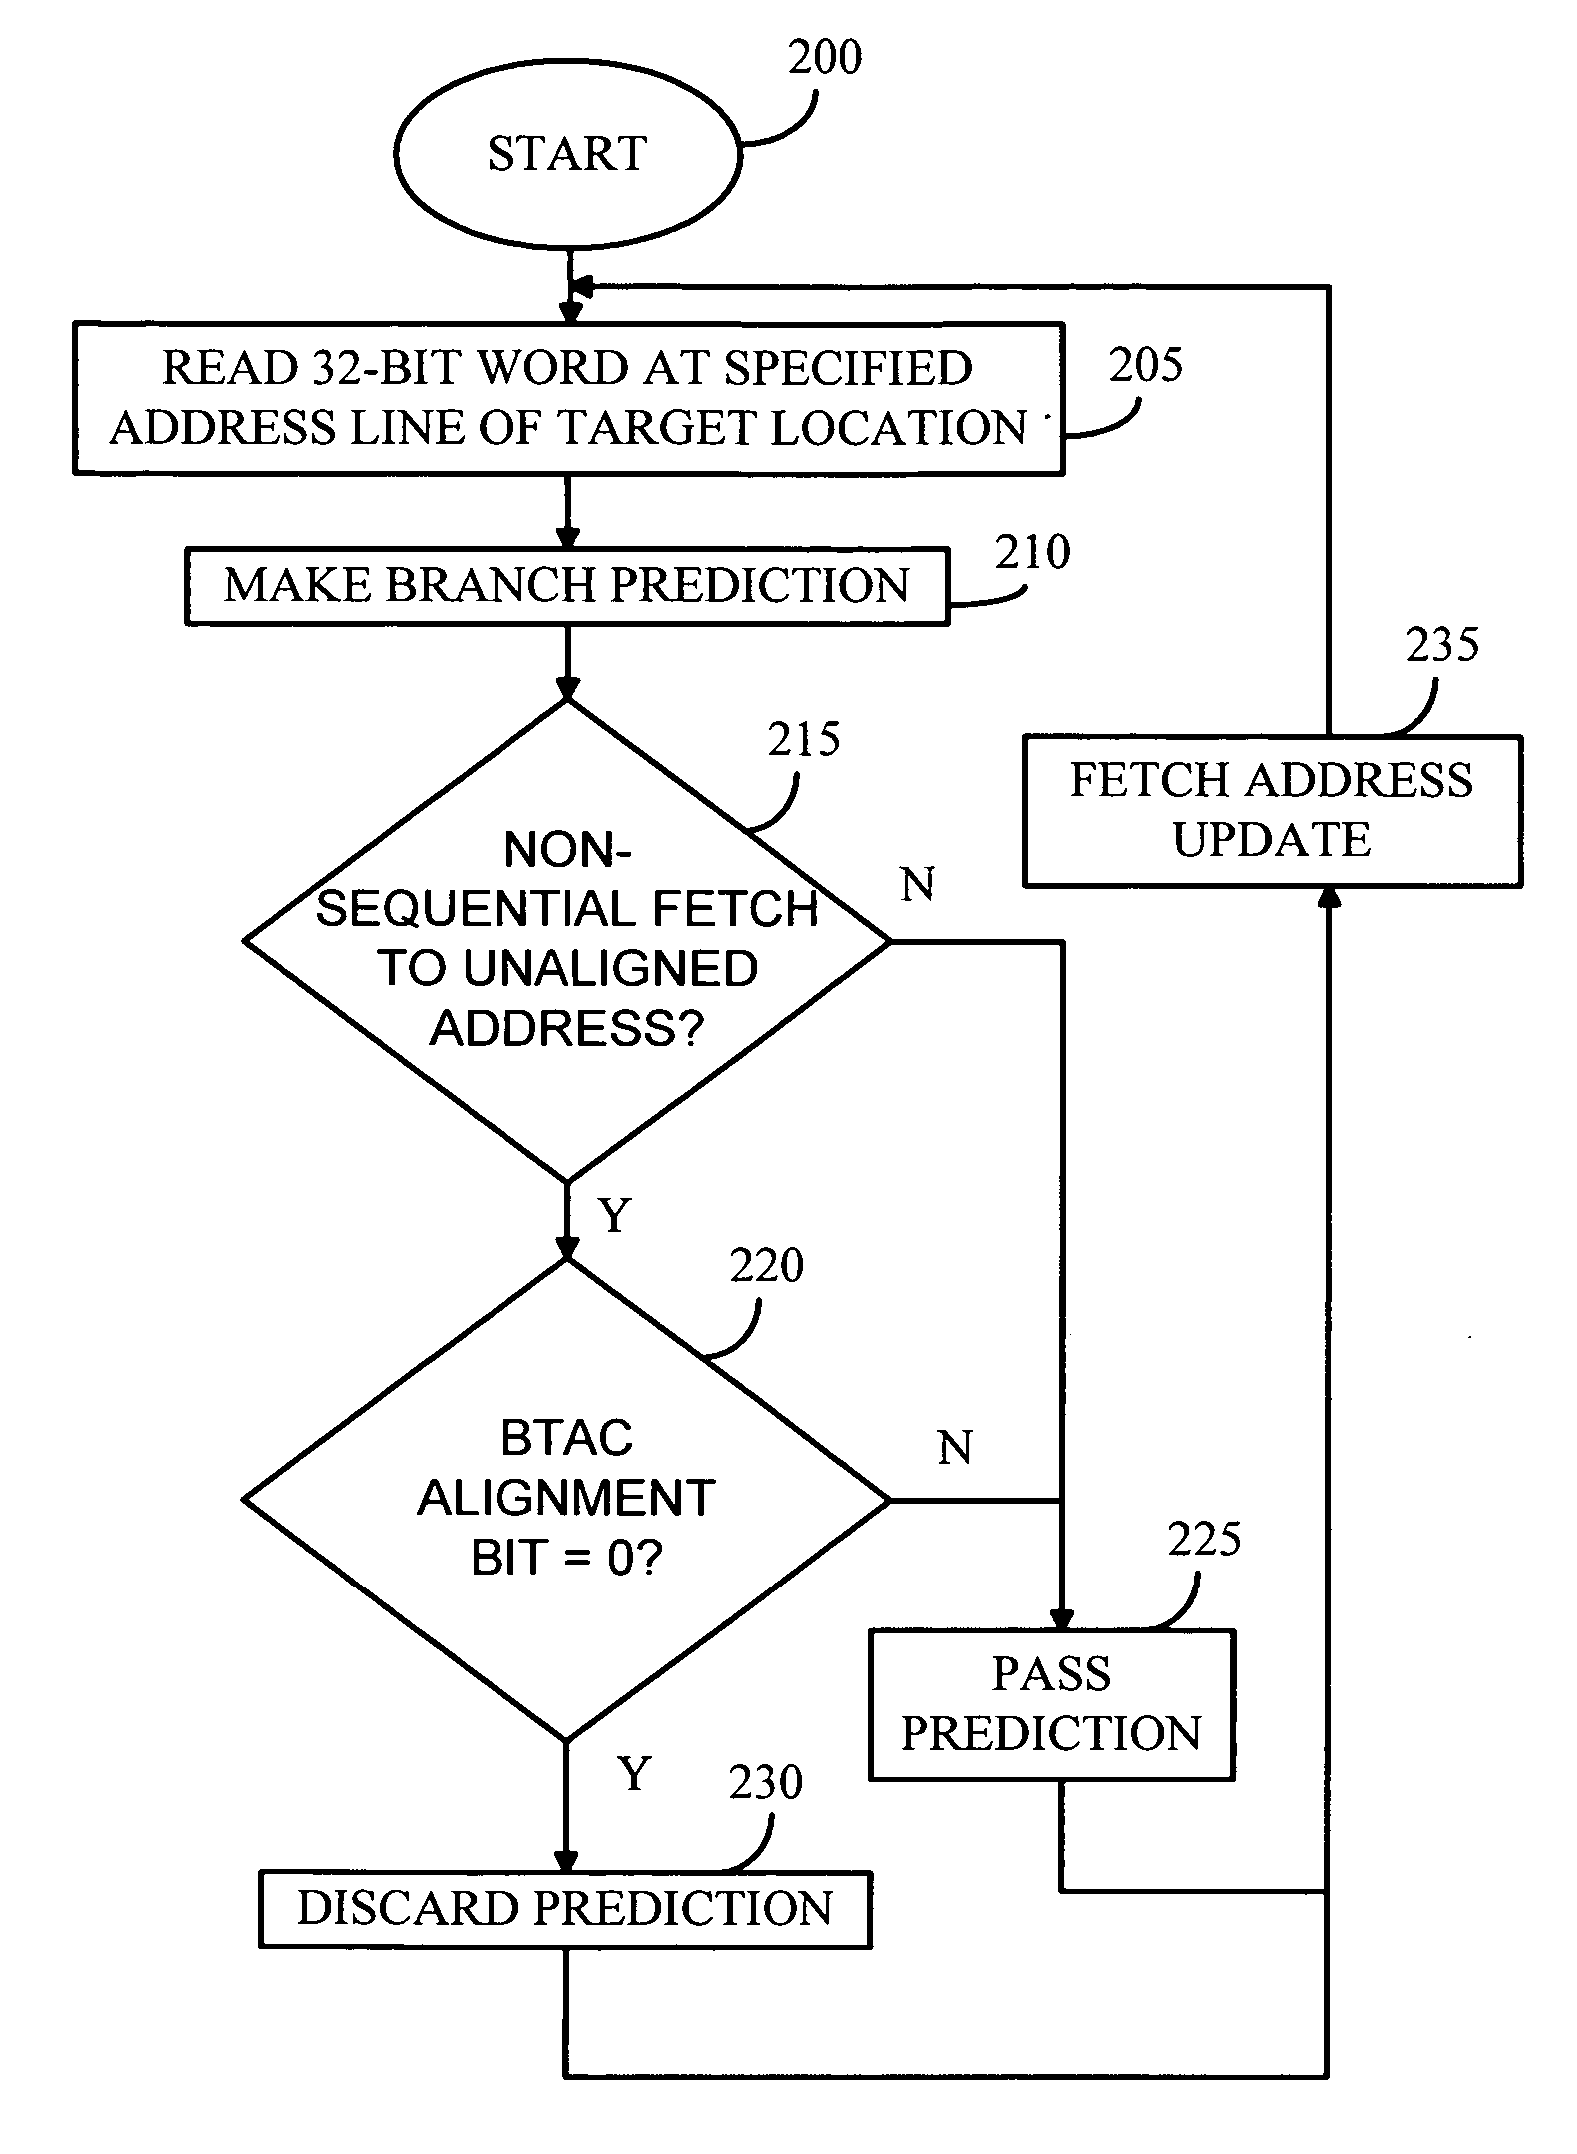 Systems and methods for performing branch prediction in a variable length instruction set microprocessor